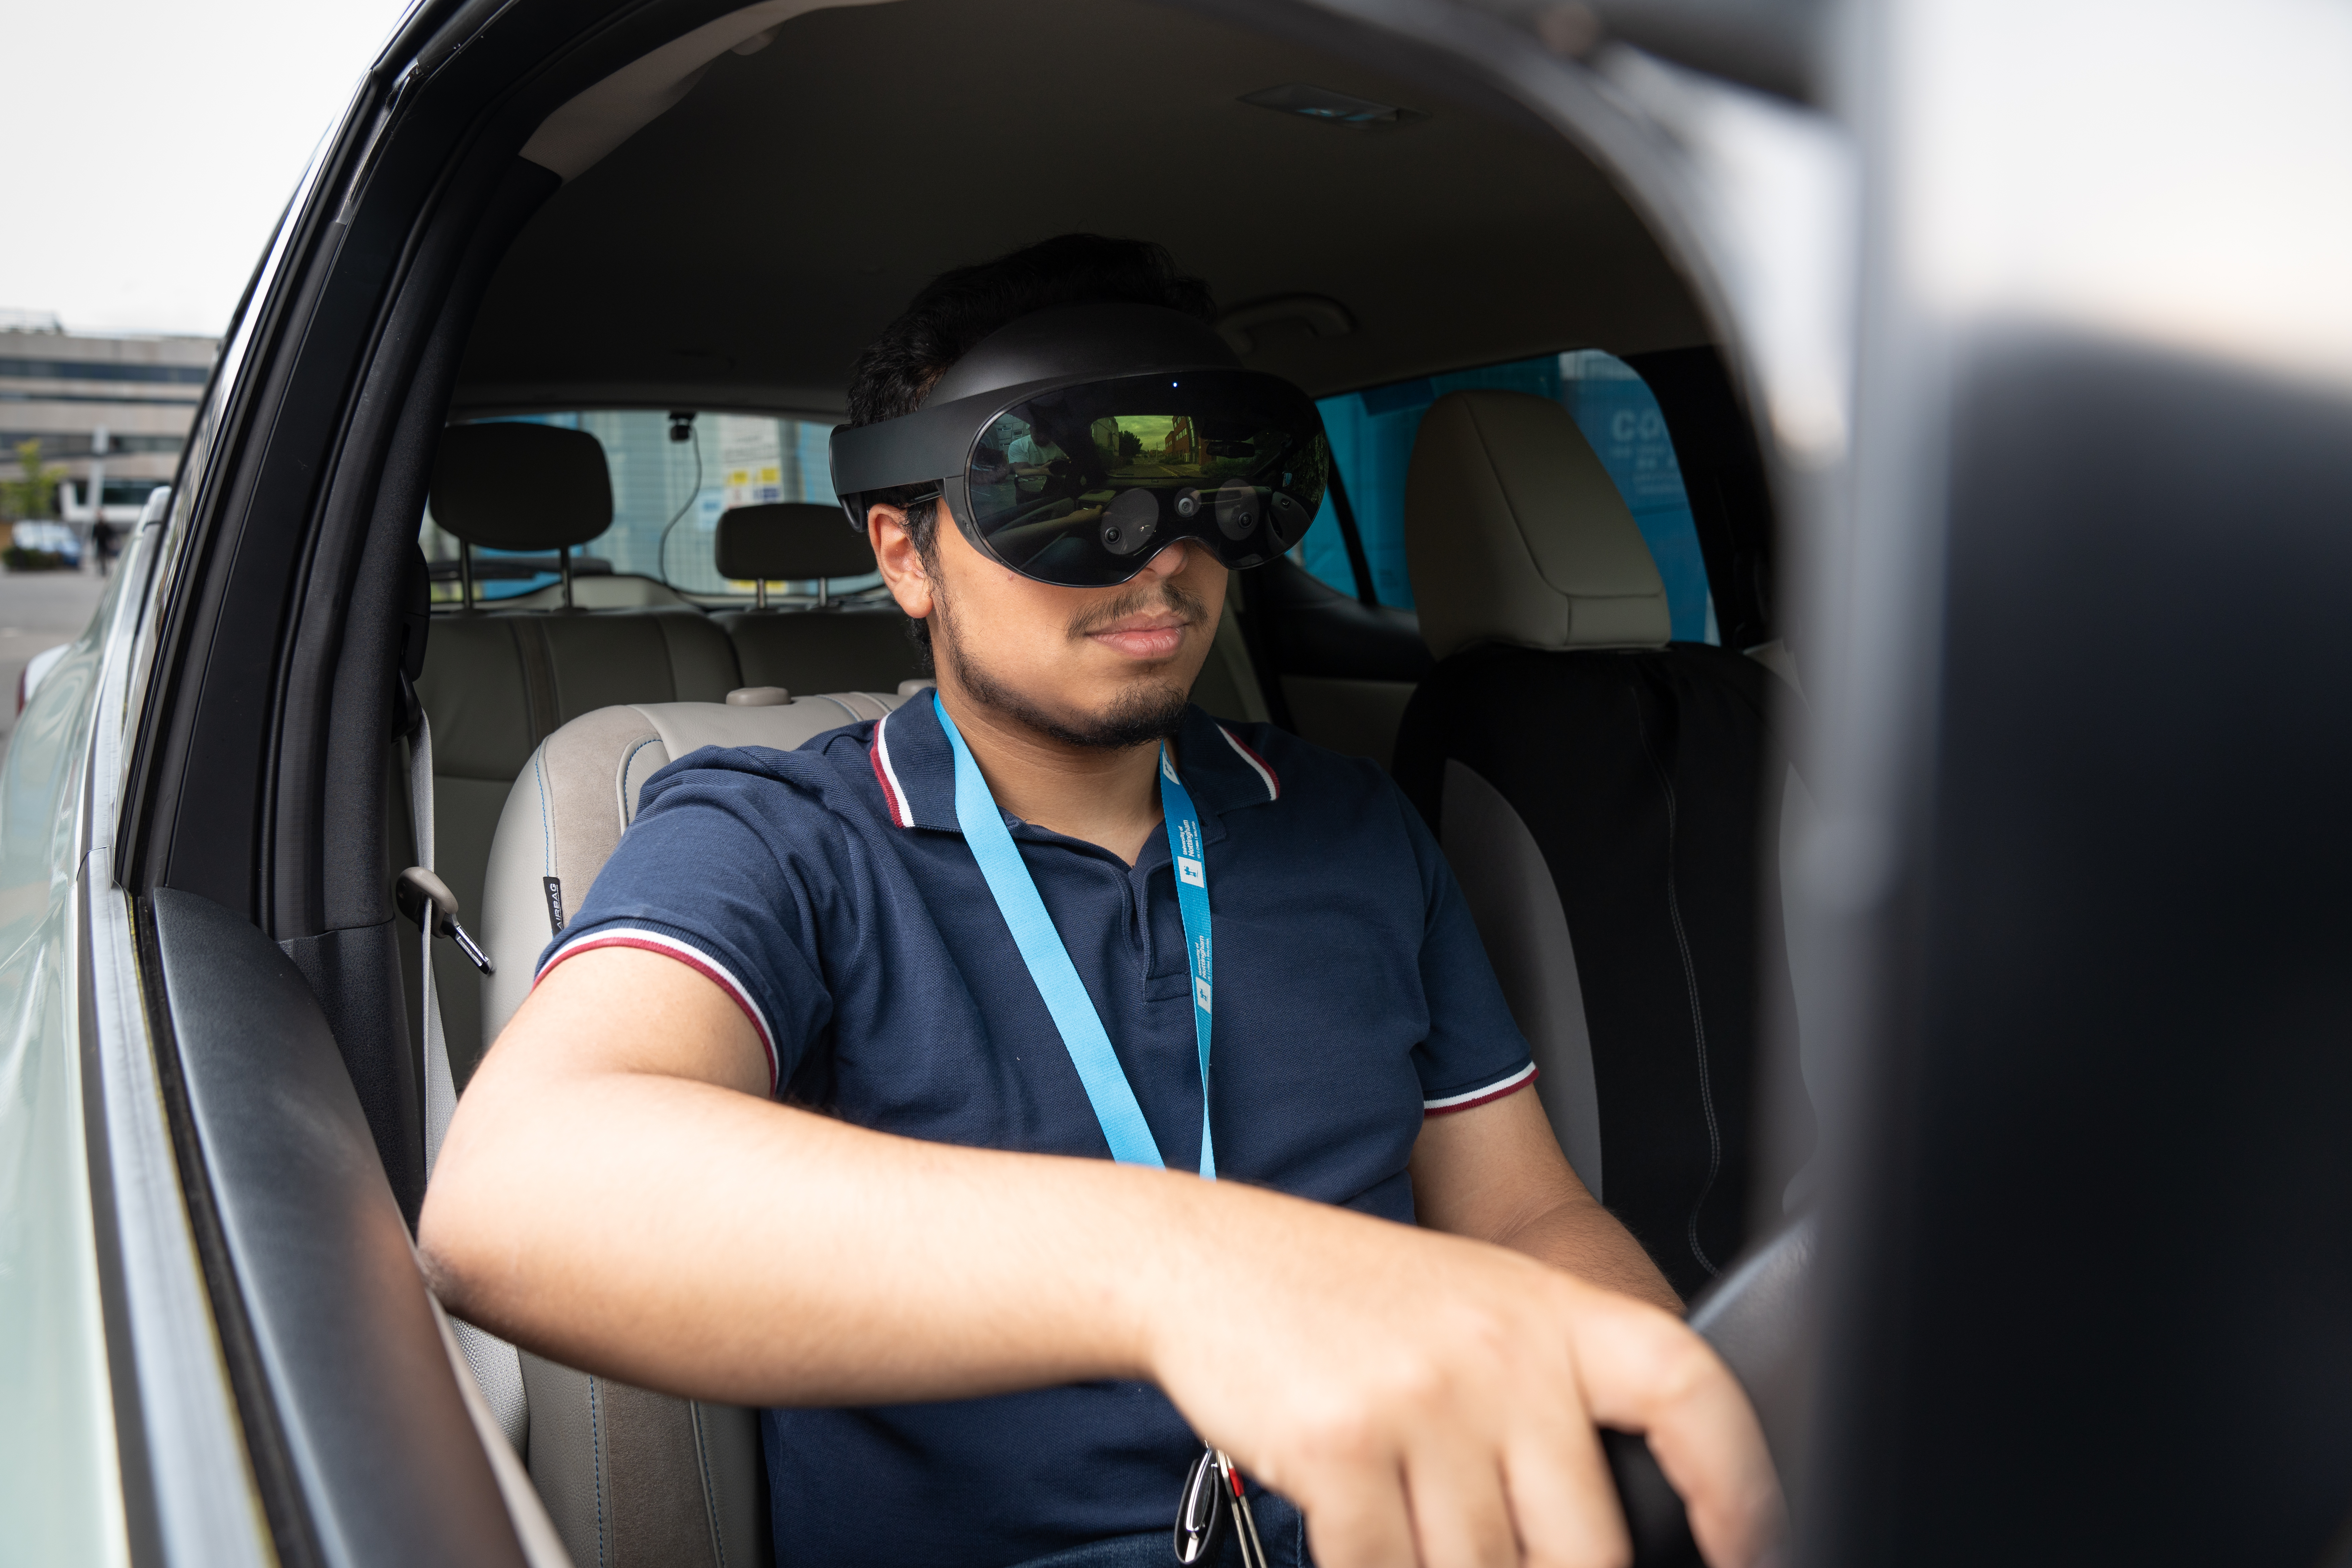 Postgraduate student in VR headset, in ServCity Driverless Car, Innovative Technology Research Centre, University Park campus